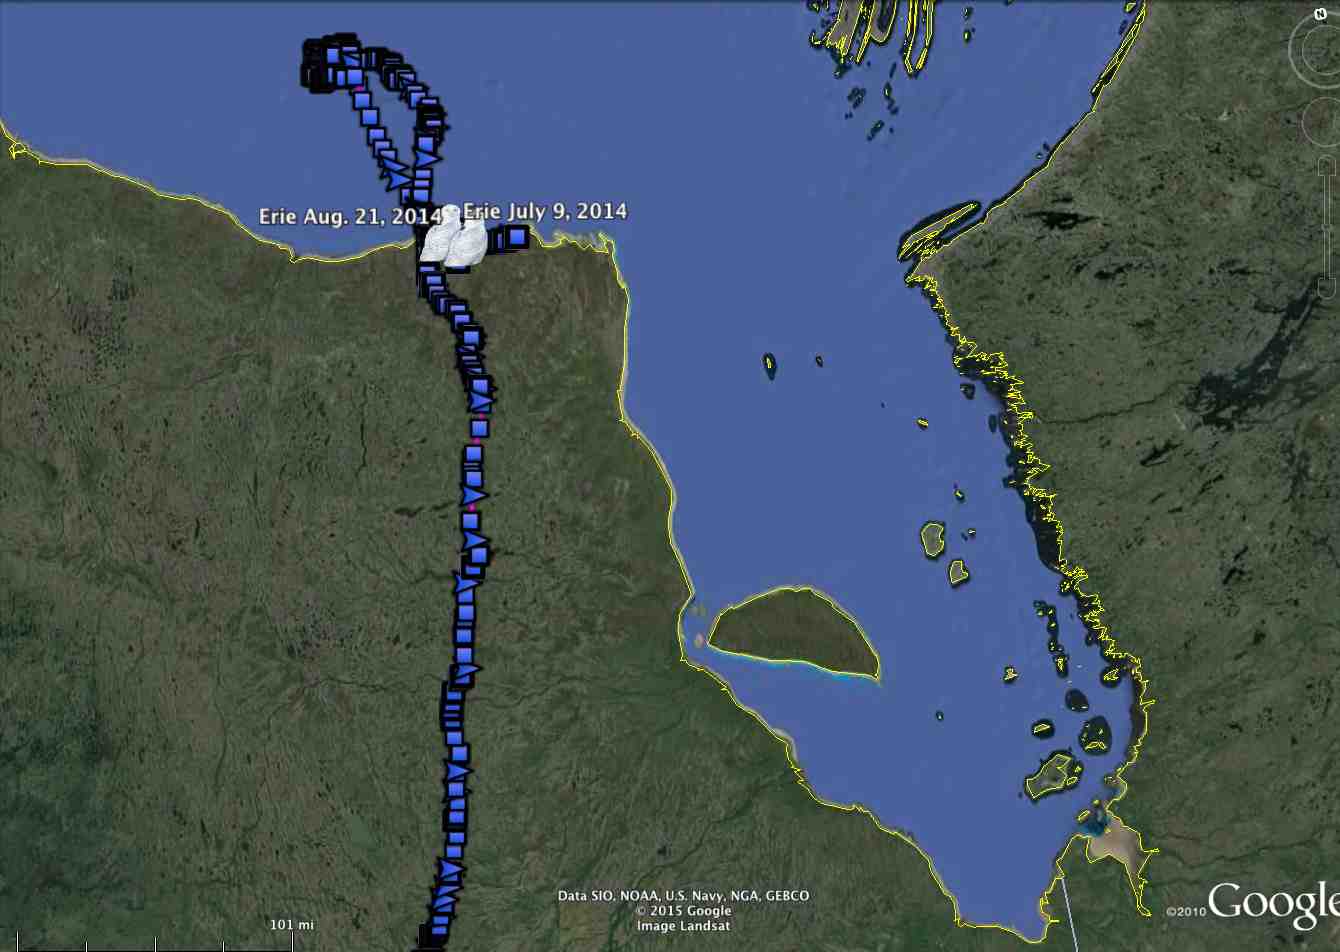 Unlike Millcreek and Century, Erie moved up the west side of James Bay last spring, and spent the summer along (and on) the southern edge of Hudson Bay. (©Project SNOWstorm and Google Earth)